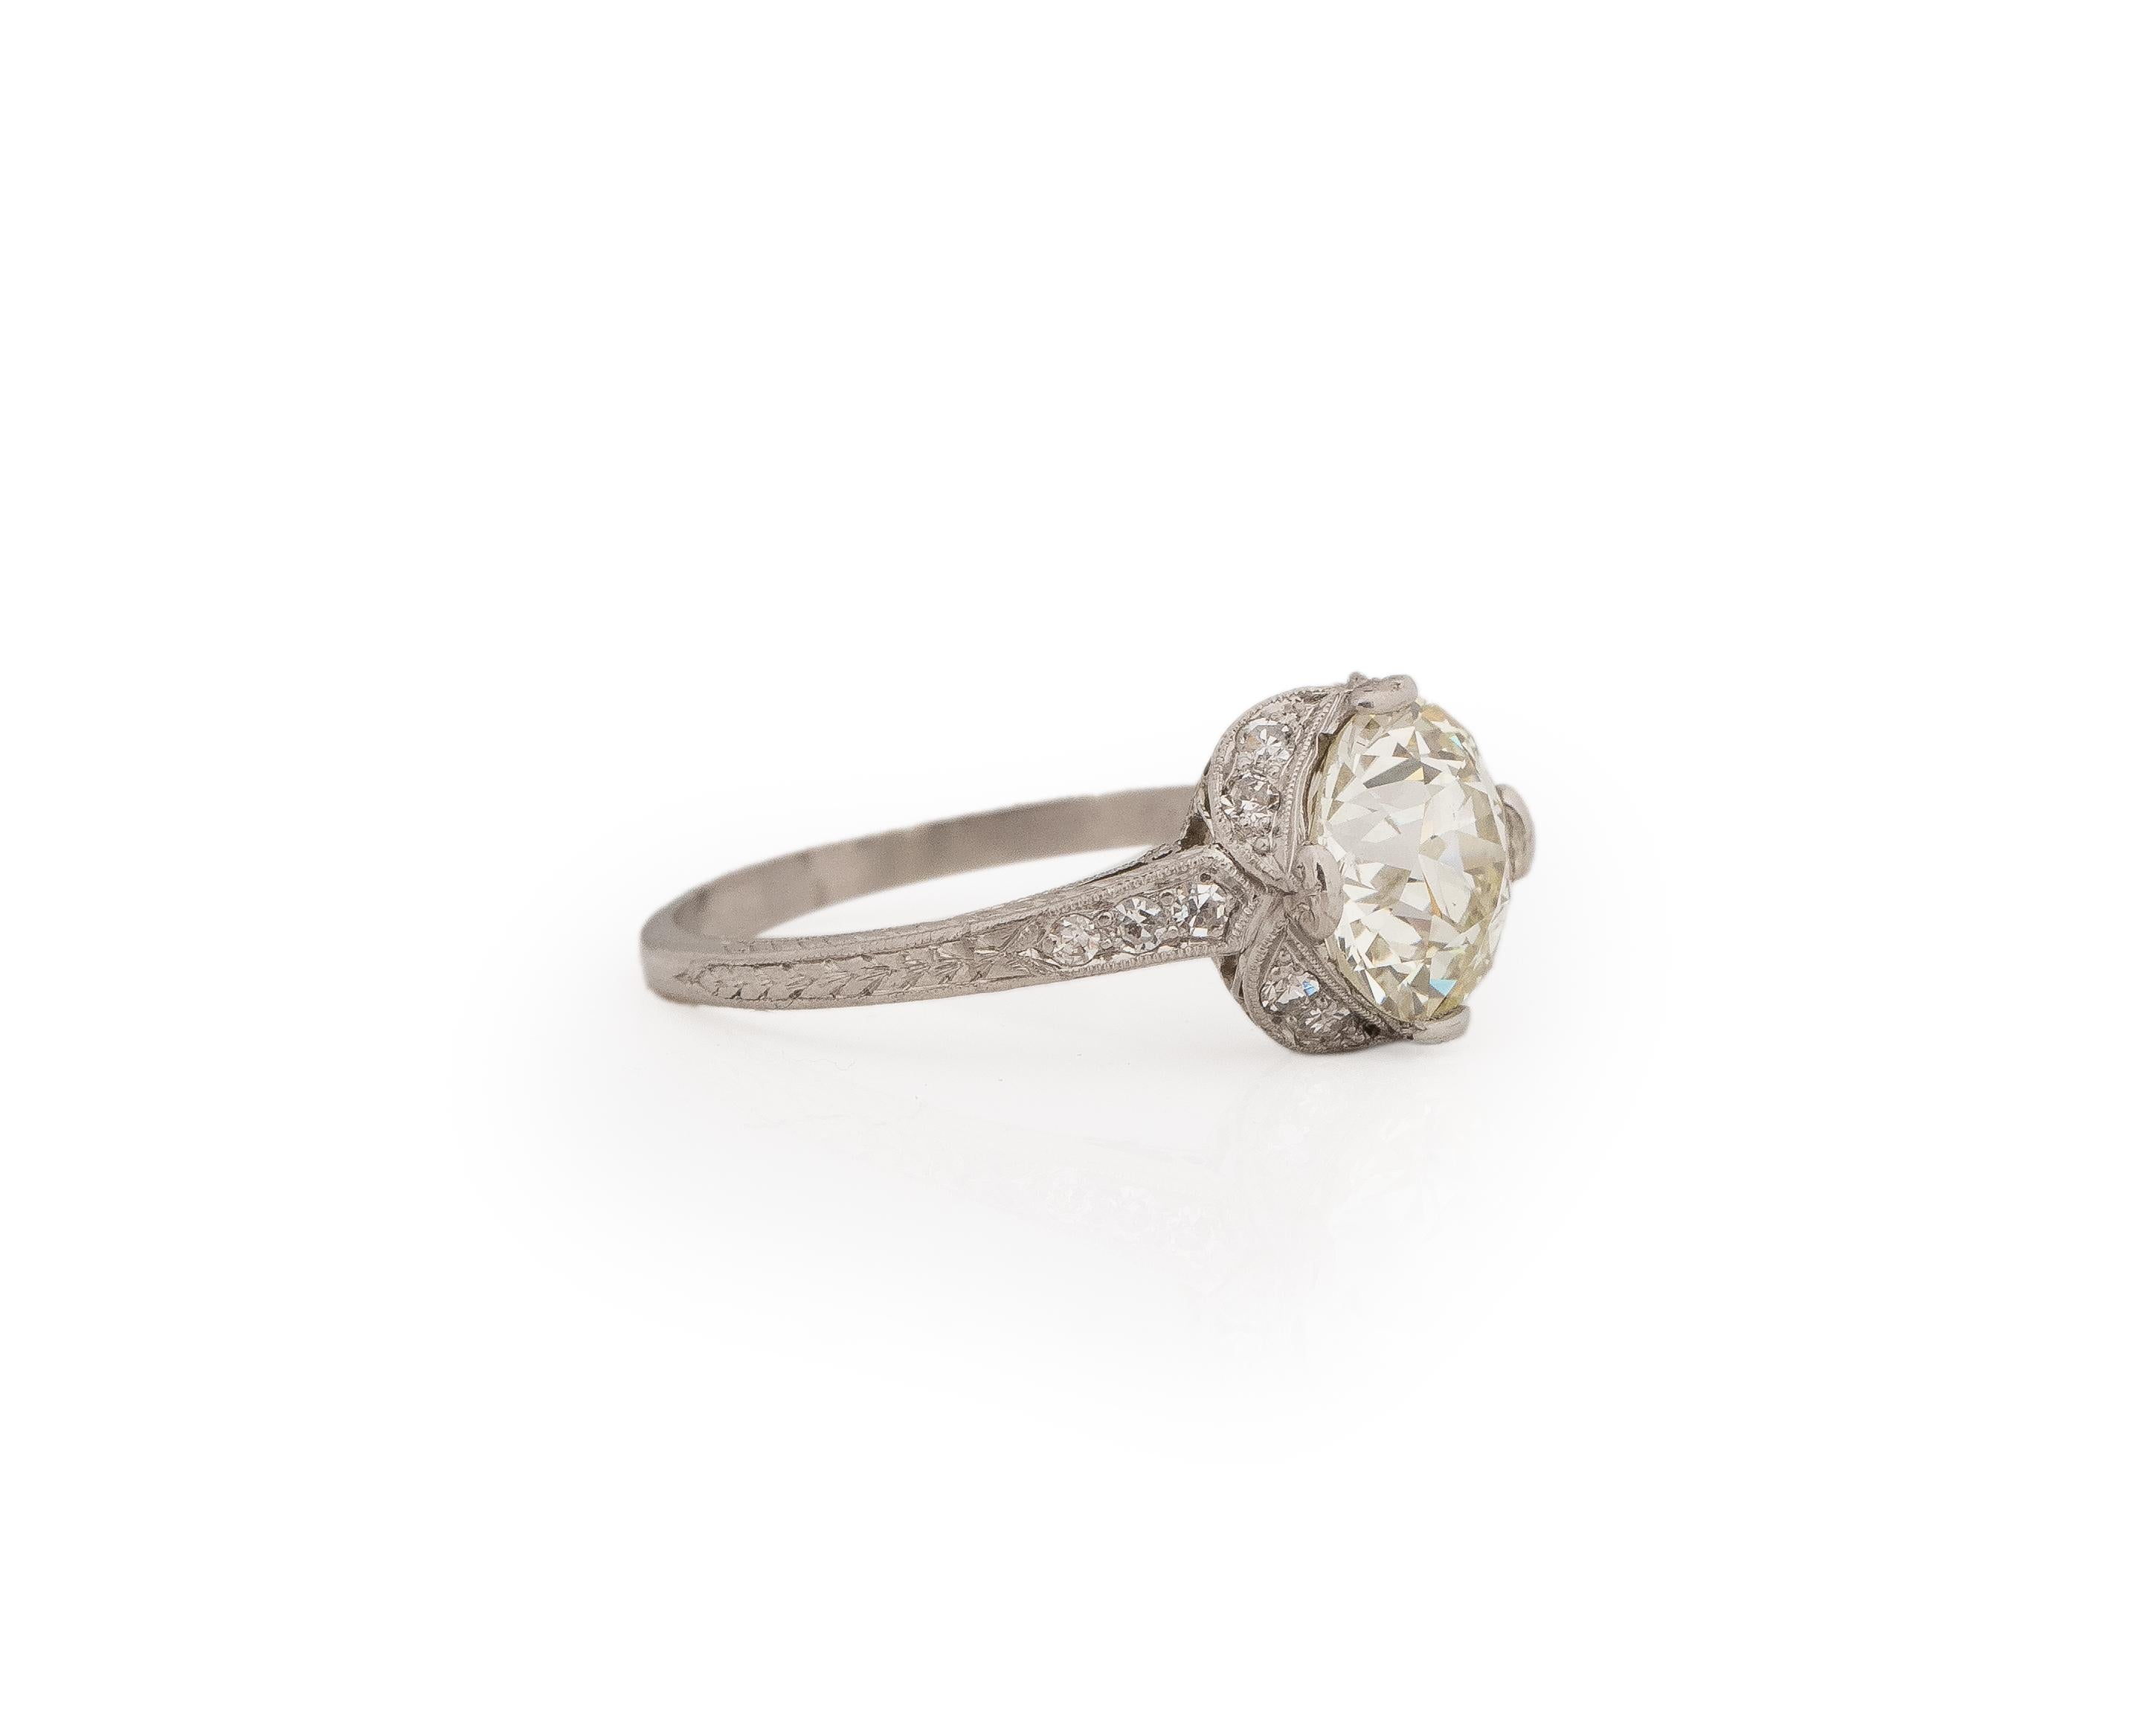 Year: 1920s

Item Details:
Ring Size: 7
Metal Type: Platinum [Hallmarked, and Tested]
Weight: 4.2 grams

Diamond Details:

GIA Report#:7235081142
Weight: 2.31ct total weight
Cut: Old European brilliant
Color: N
Clarity: VS2
Type: Natural

Side